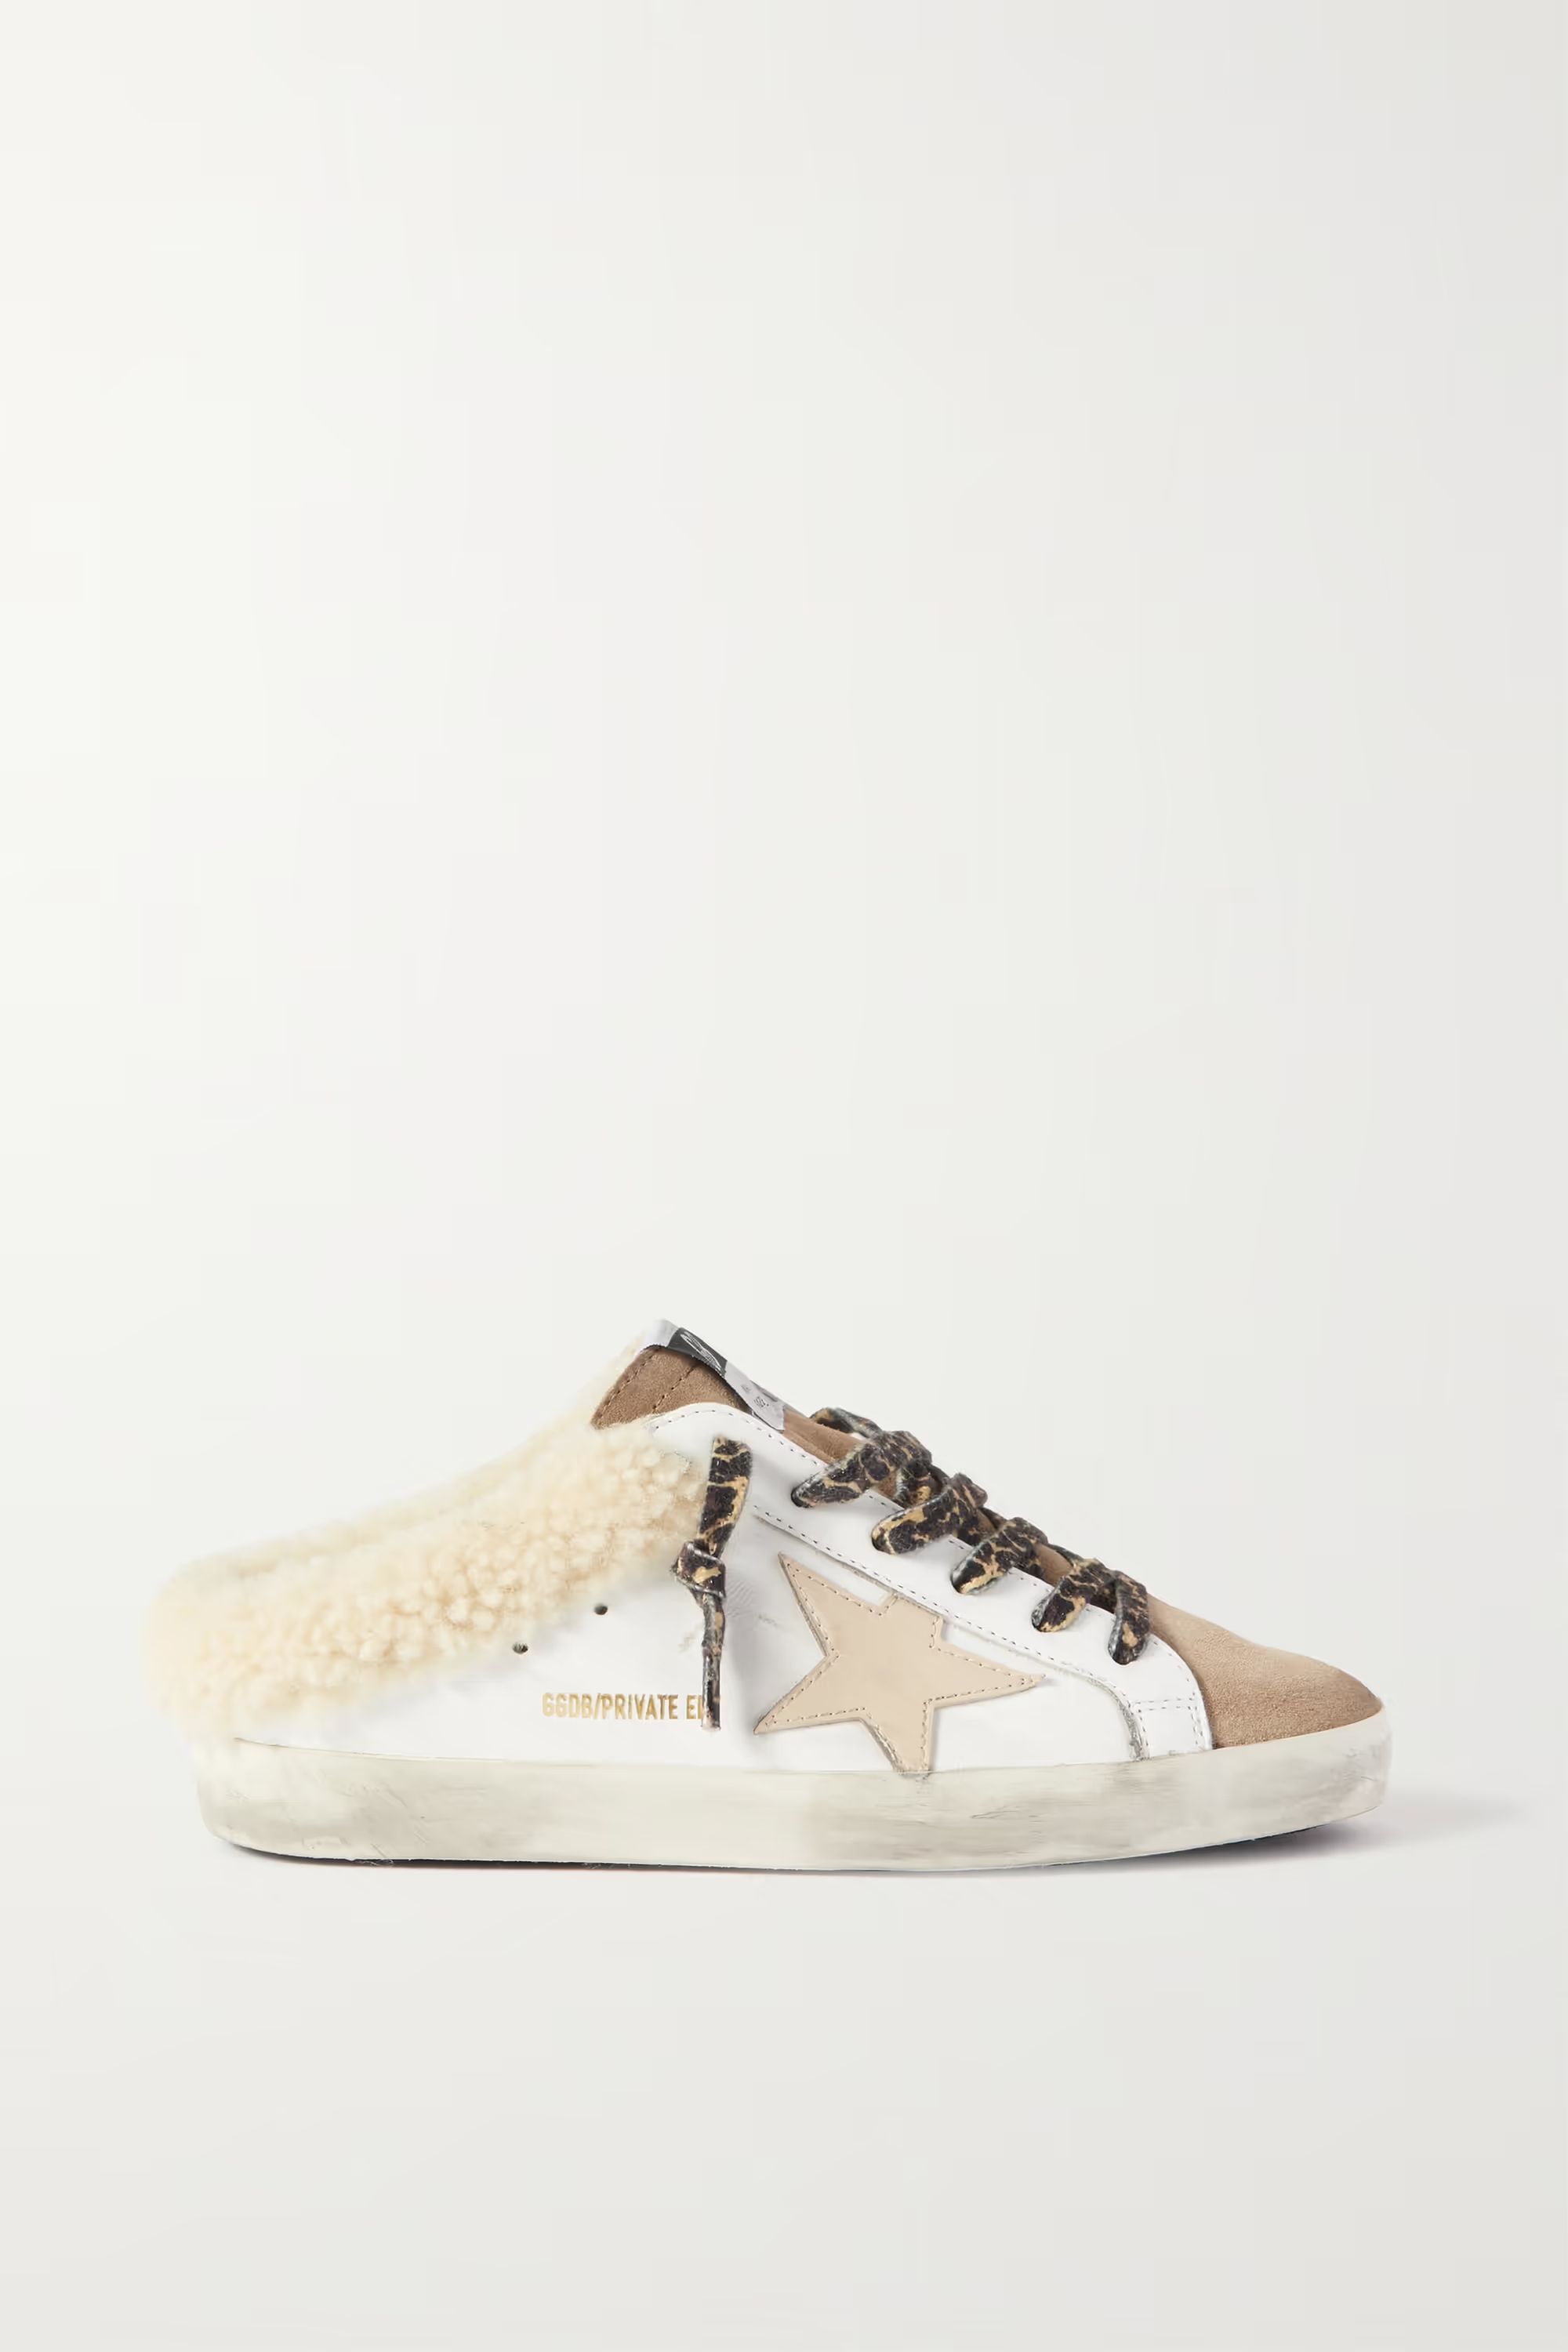 White Superstar Sabot shearling-lined distressed glittered leather slip-on sneakers | GOLDEN GOOS... | NET-A-PORTER (US)